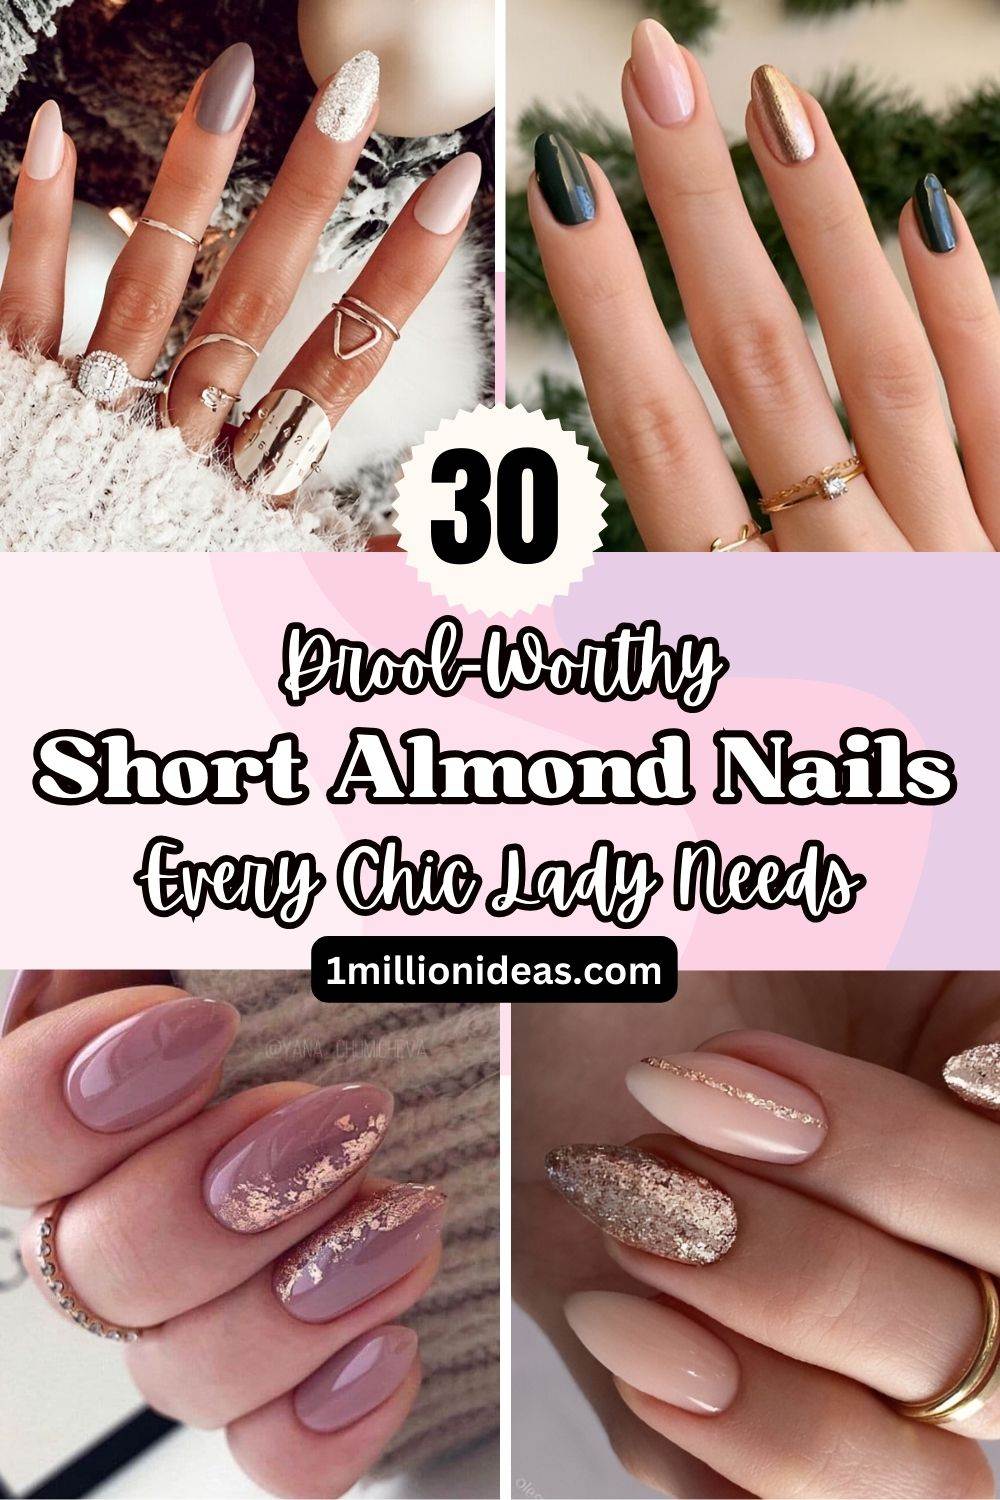 30 Drool-Worthy Short Almond Nail Ideas Every Chic Lady Needs - 191